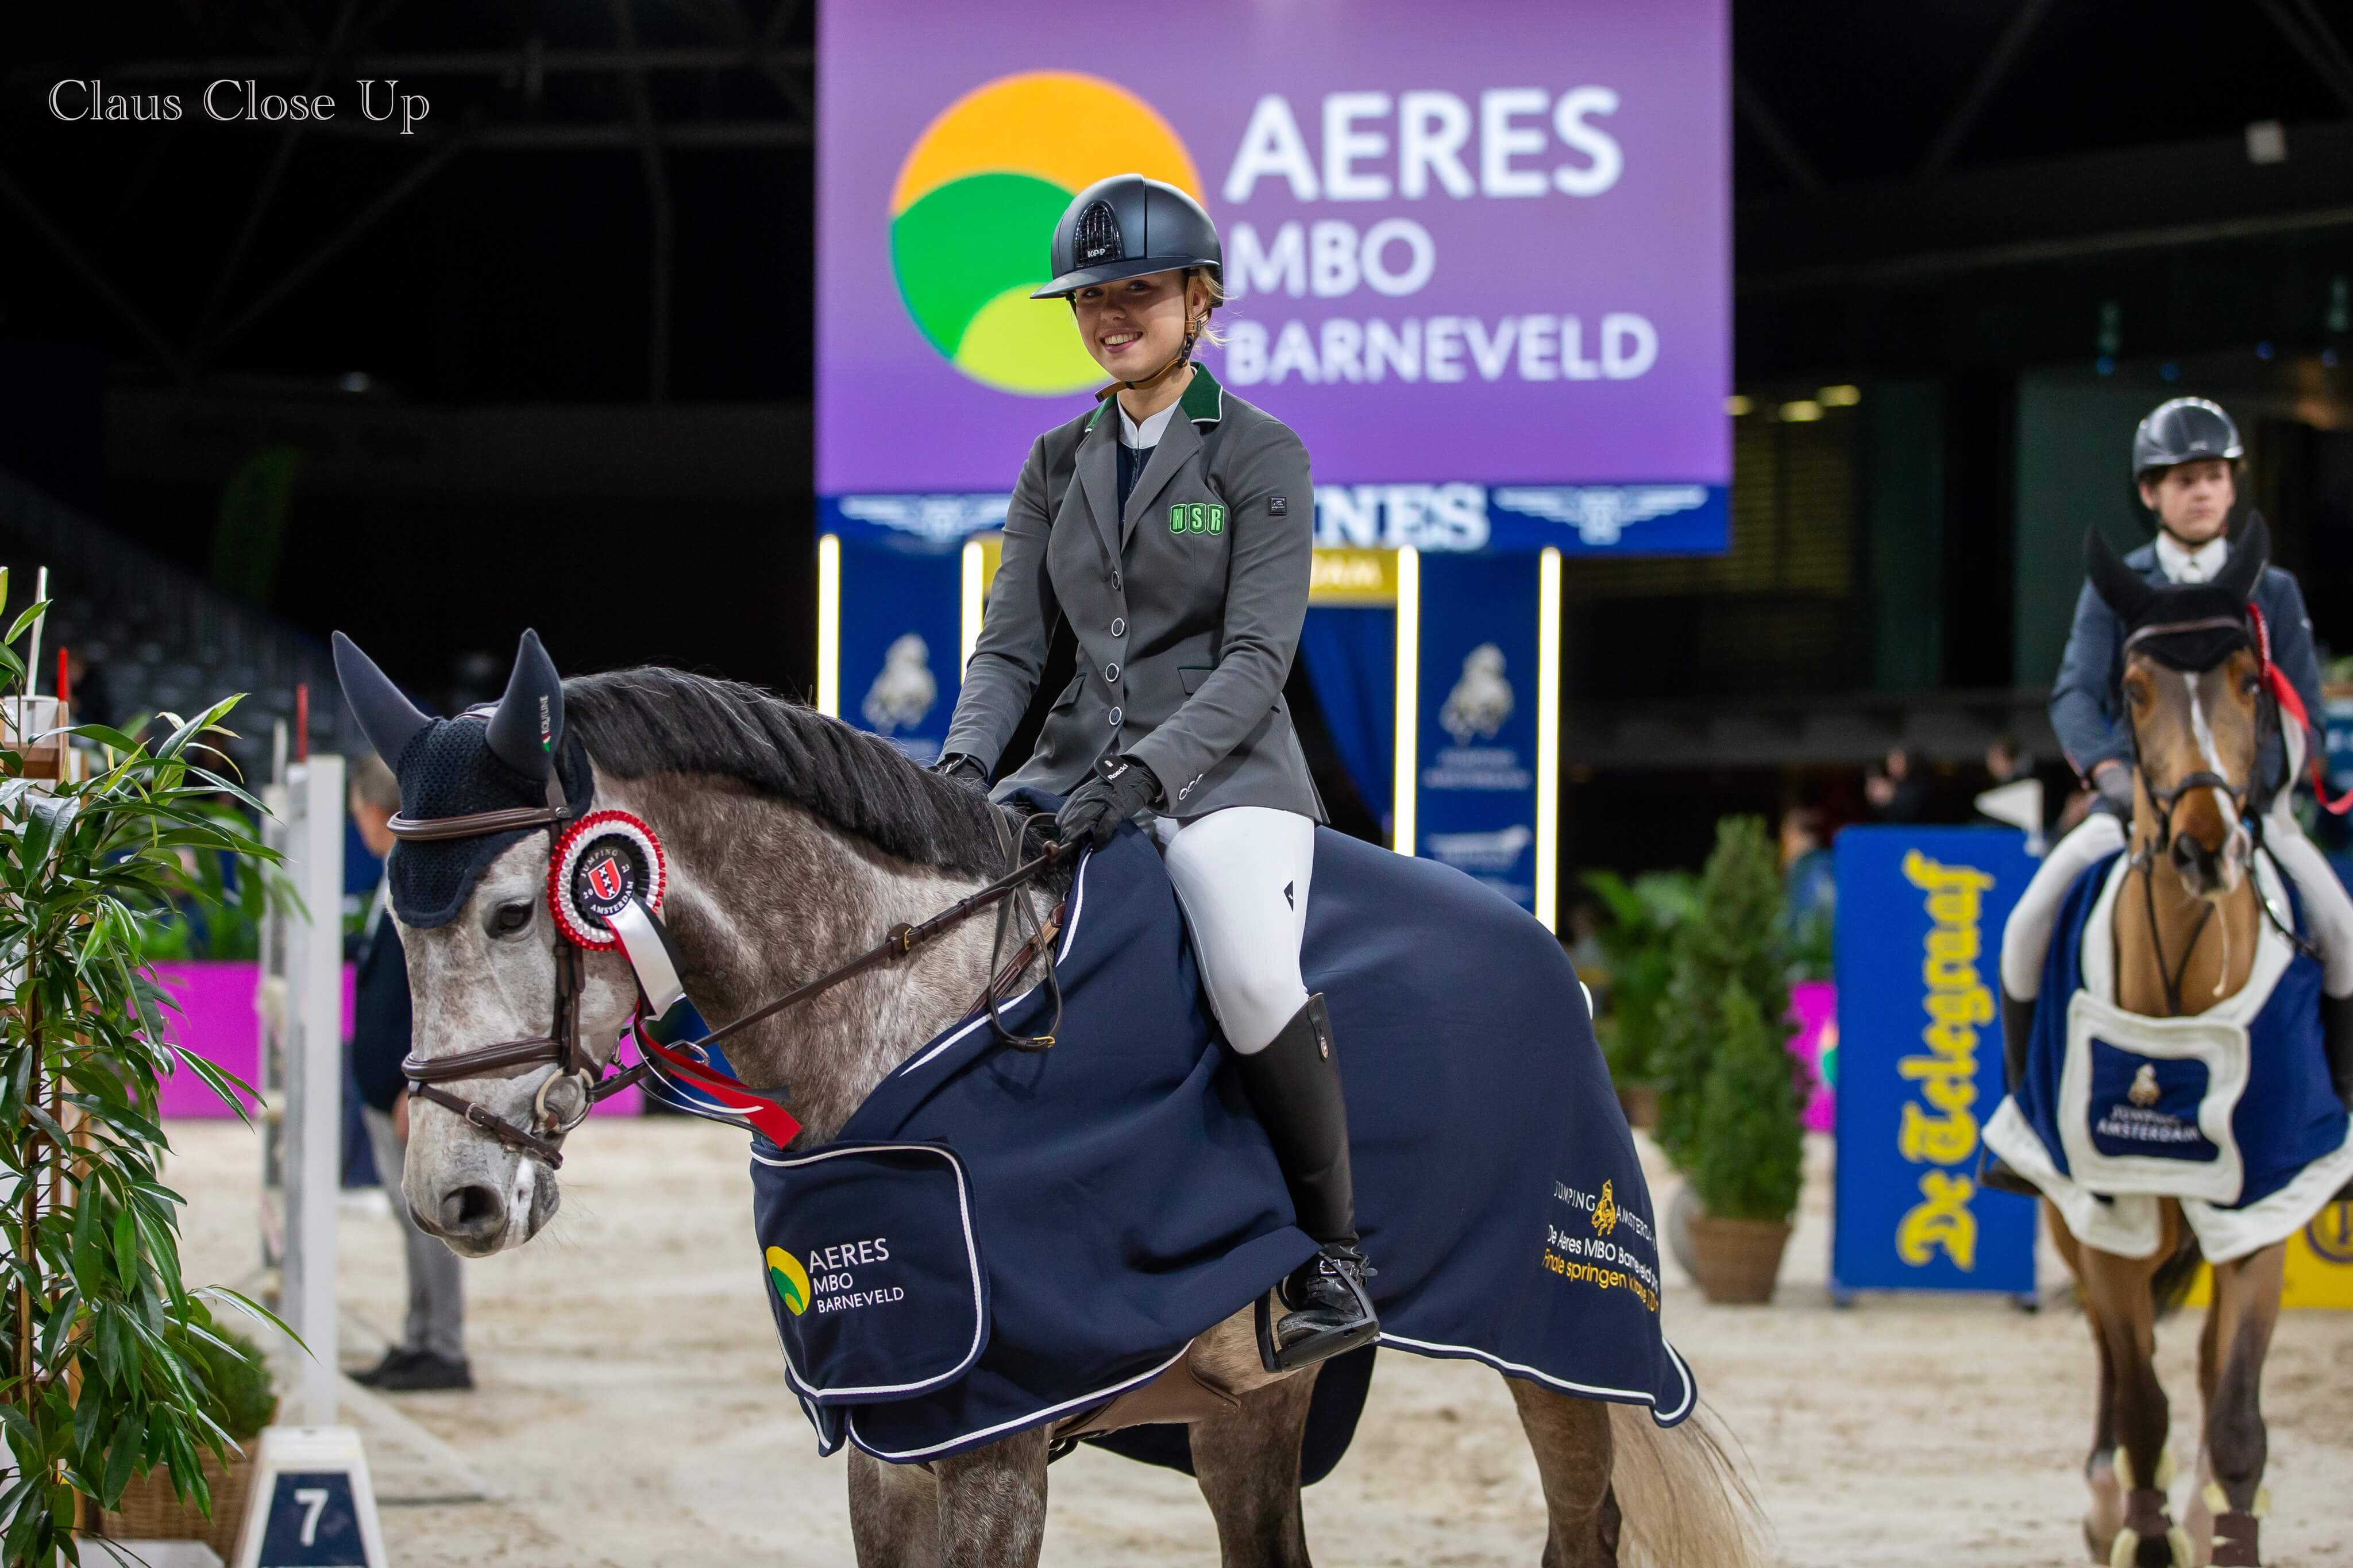 Suze Bos opent springcompetitie in Amsterdam met winst in 1.10m Nationale Finale